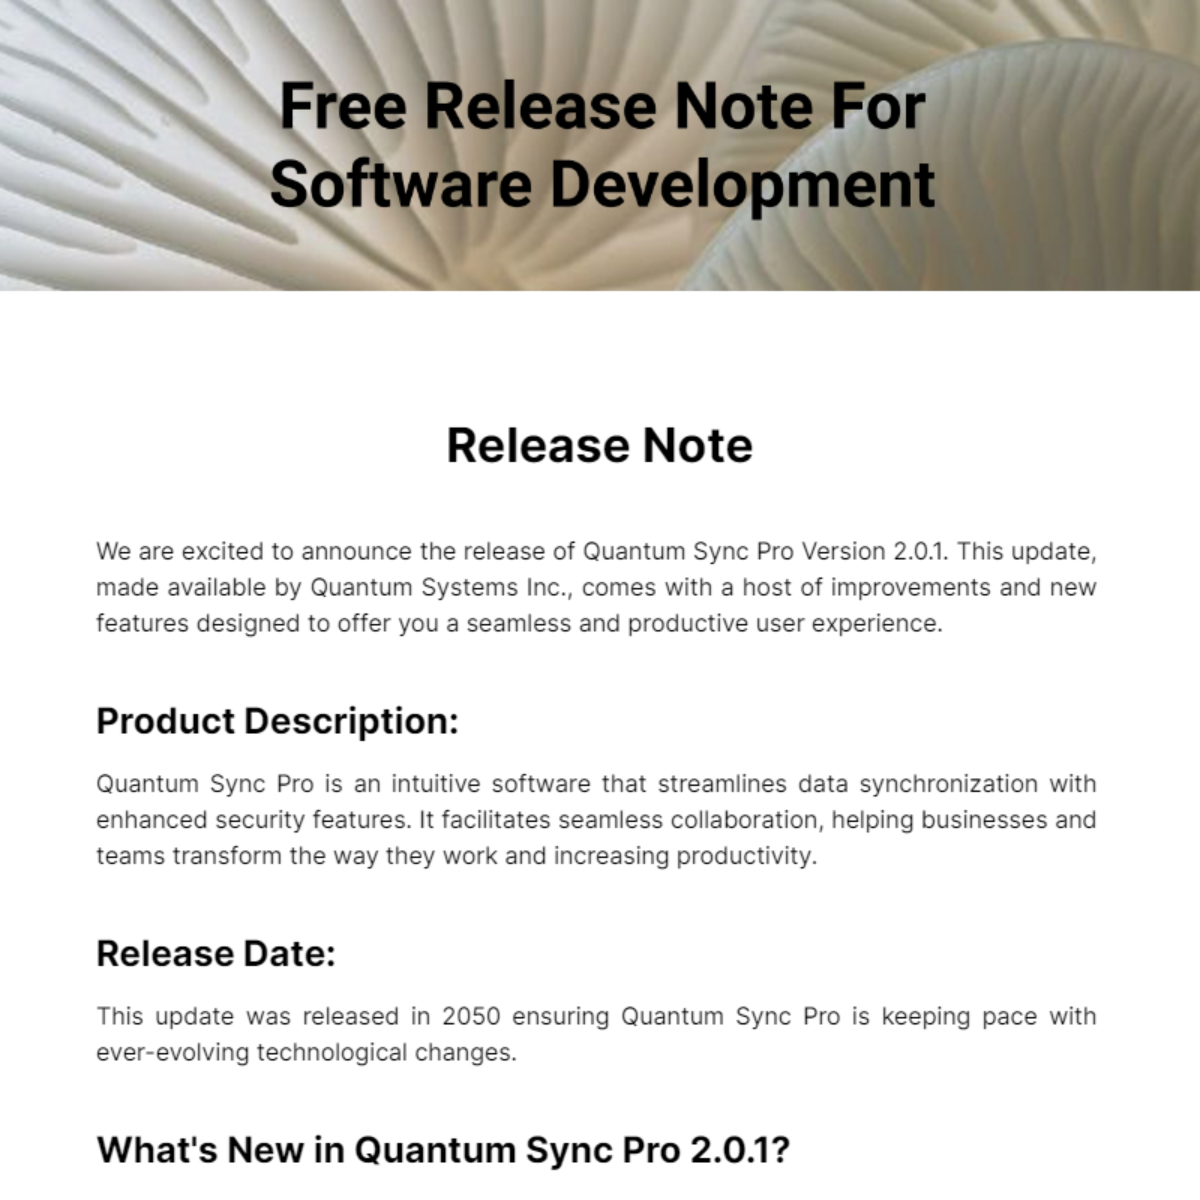 Free Release Note For Software Development Template